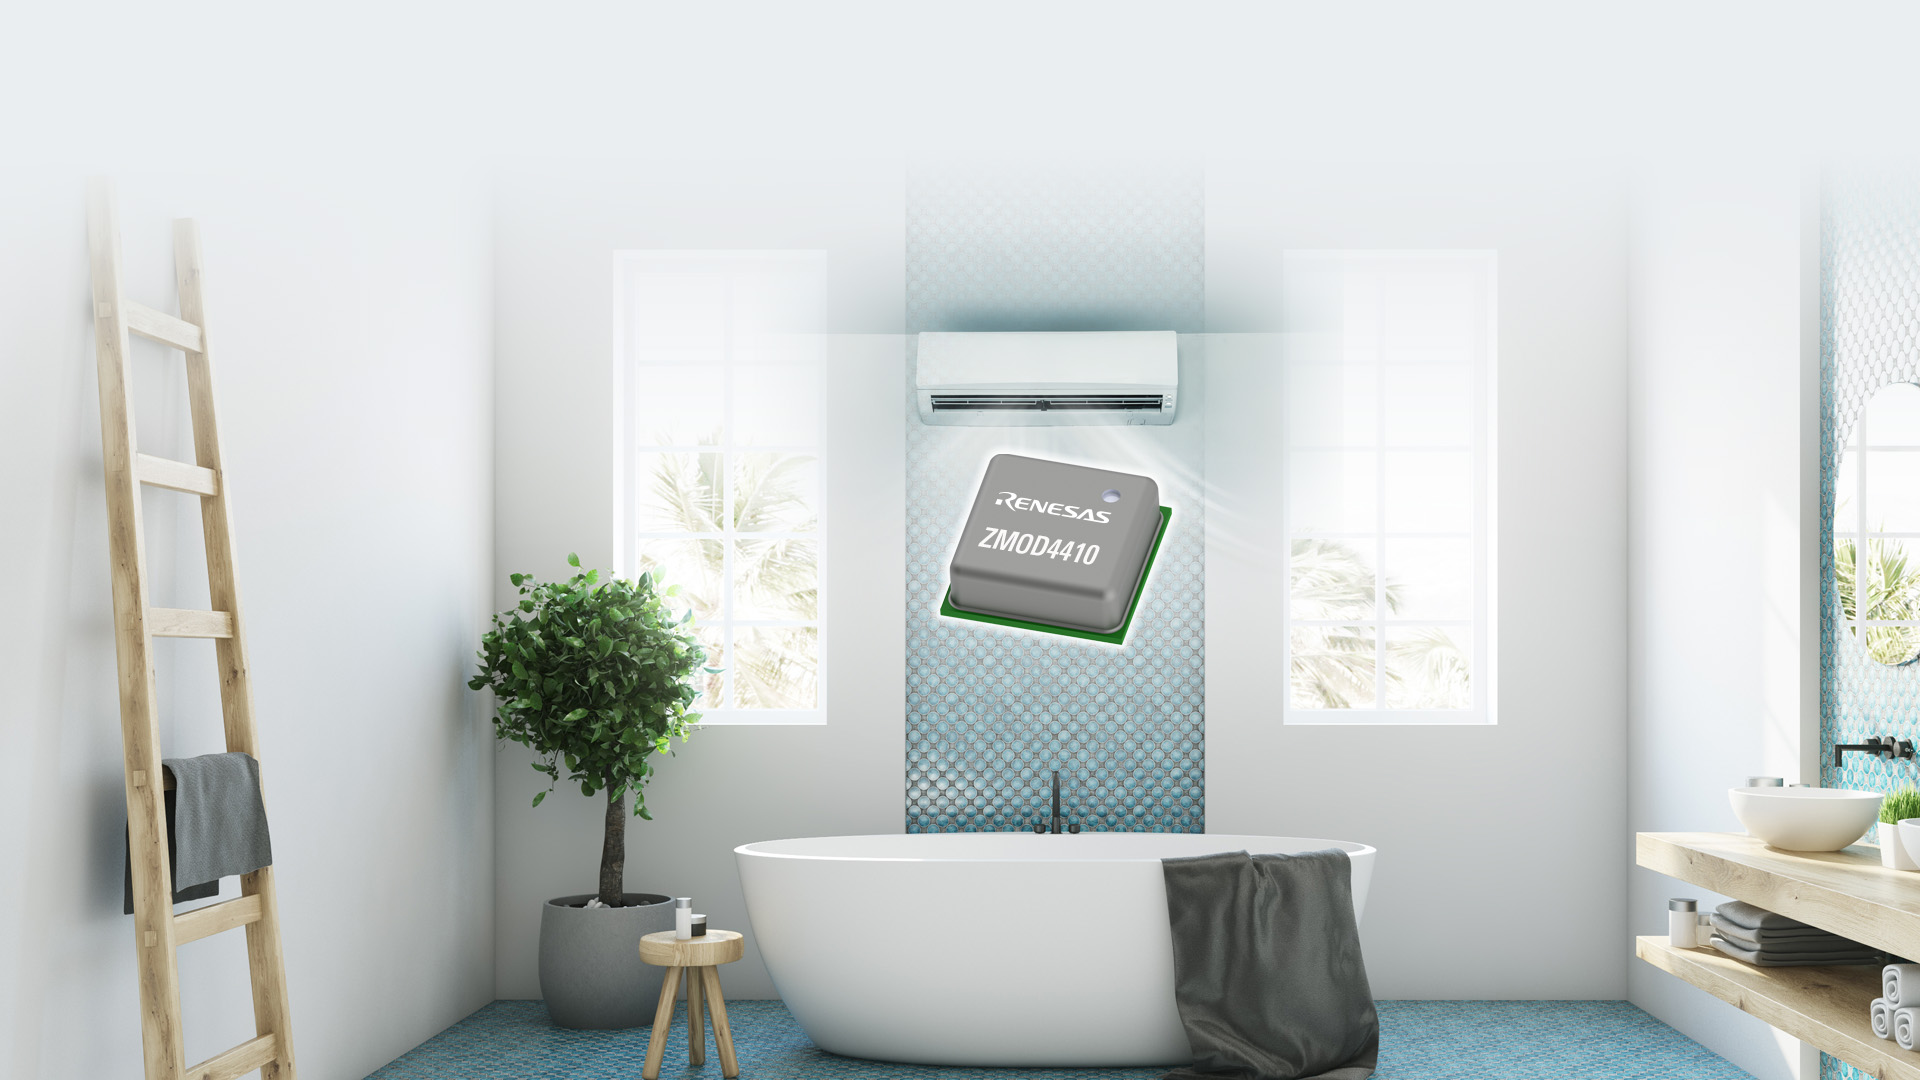 Neural network-trained firmware improves sensing performance for indoor air quality applications. Source: Renesas Electronics Corporation